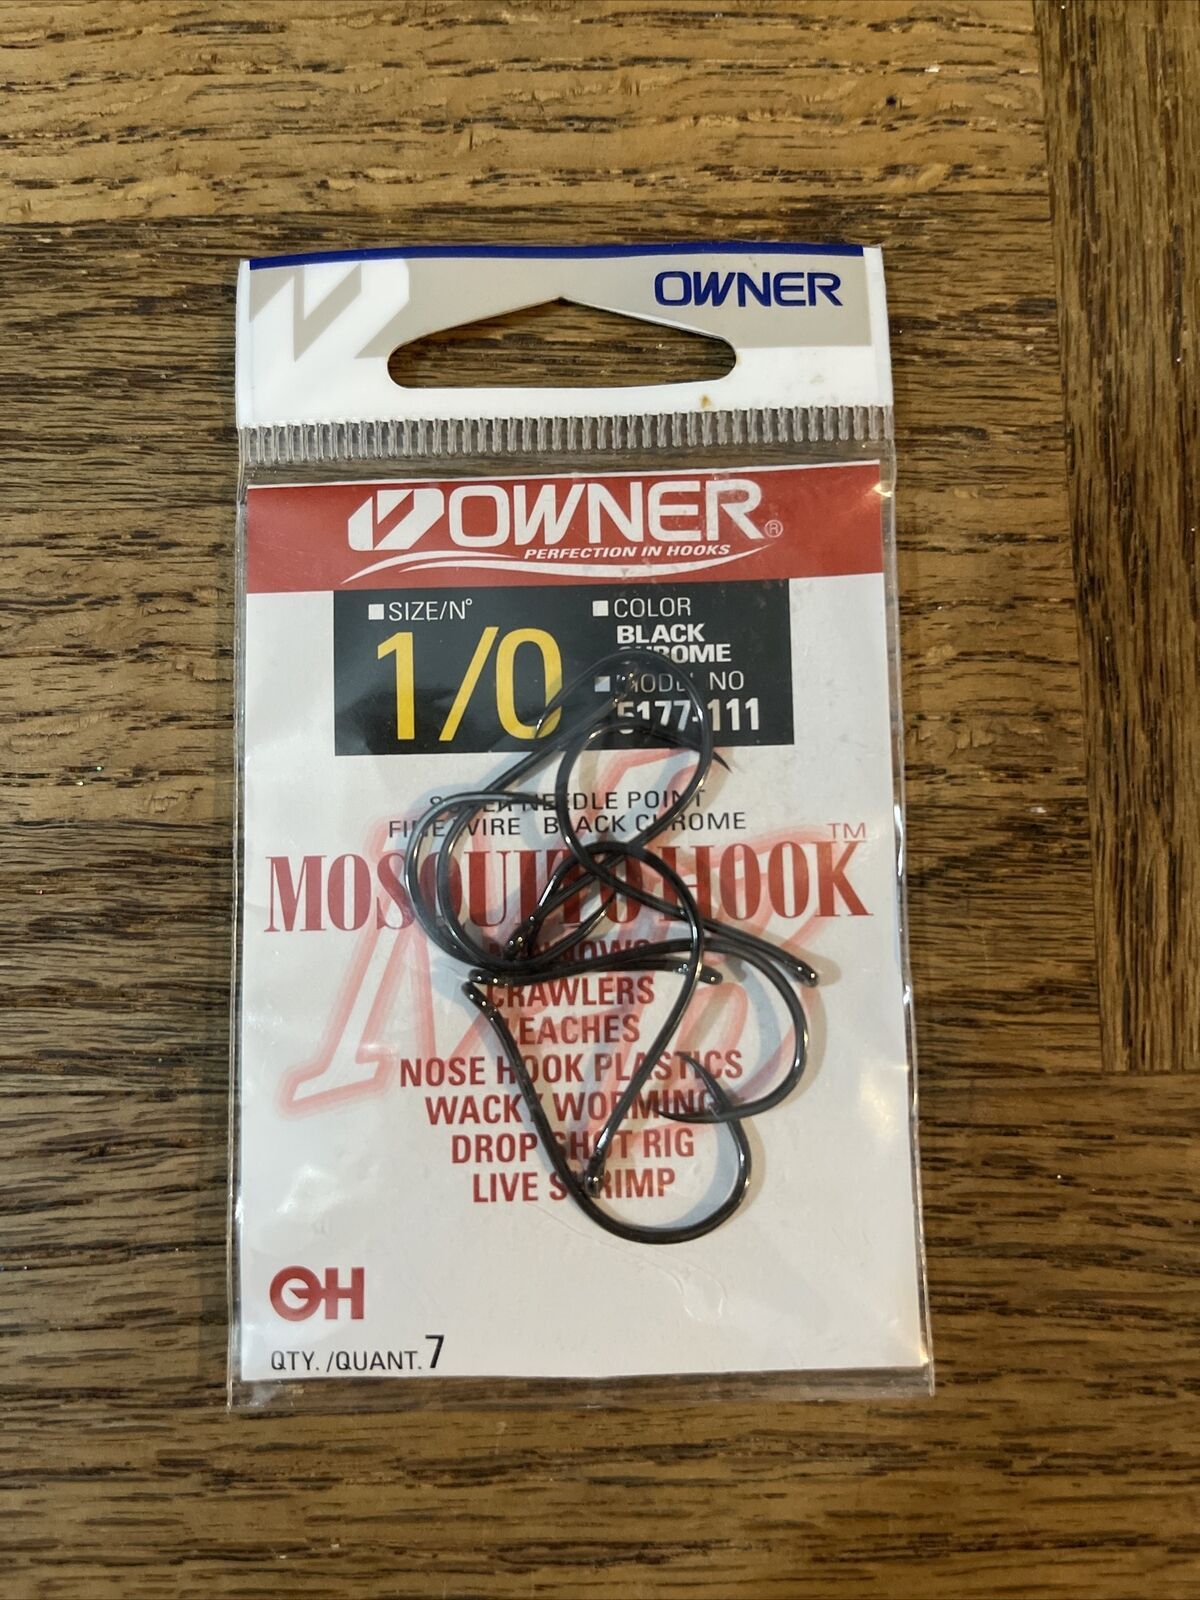 Owner mosquito hook size 1/0